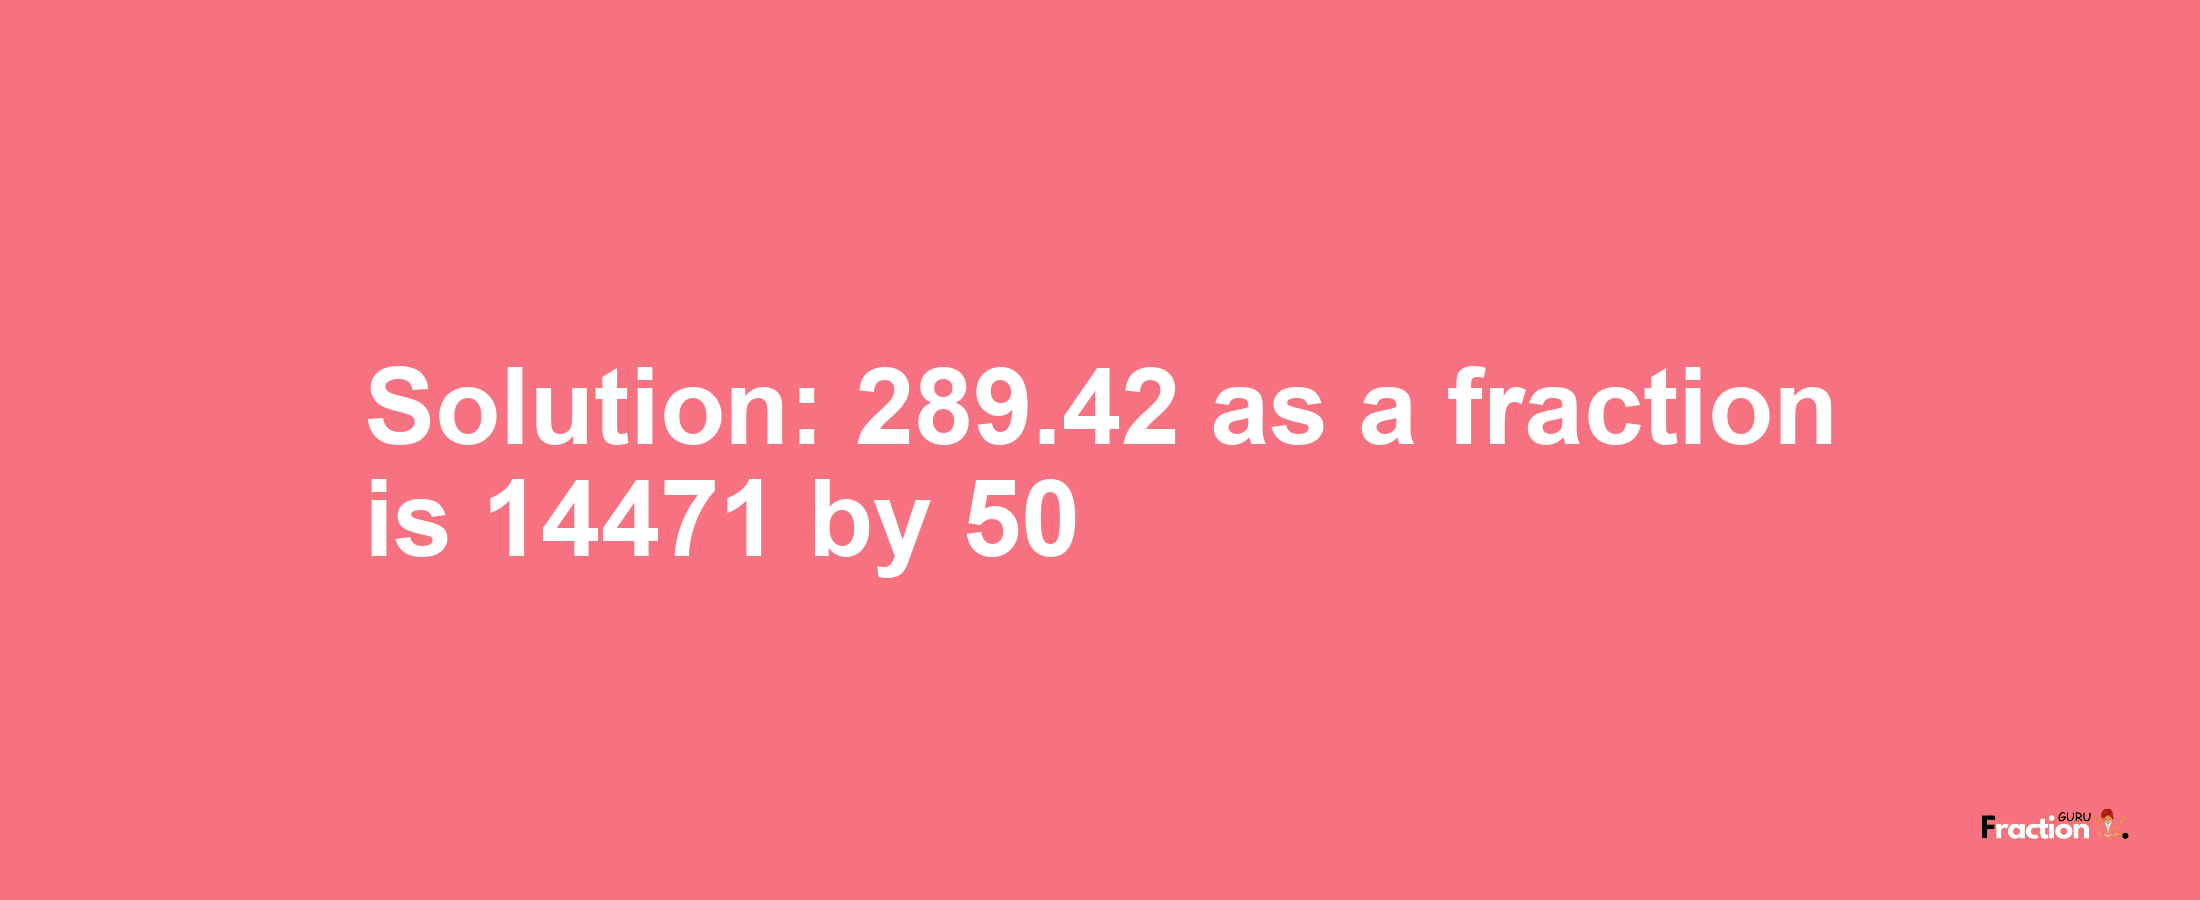 Solution:289.42 as a fraction is 14471/50